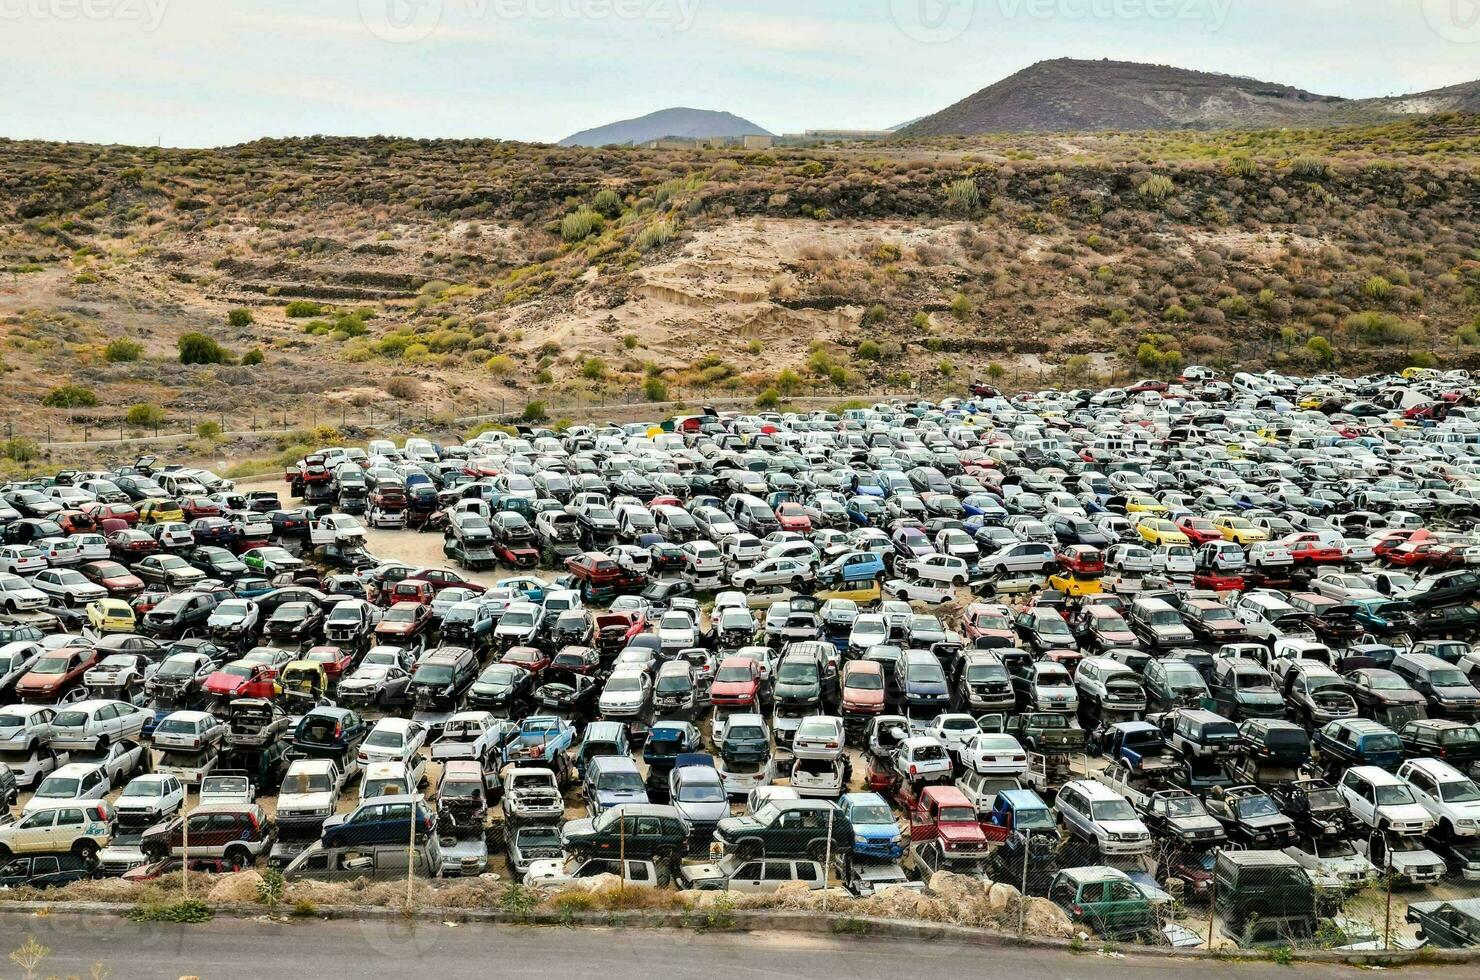 a large pile of cars in a desert photo